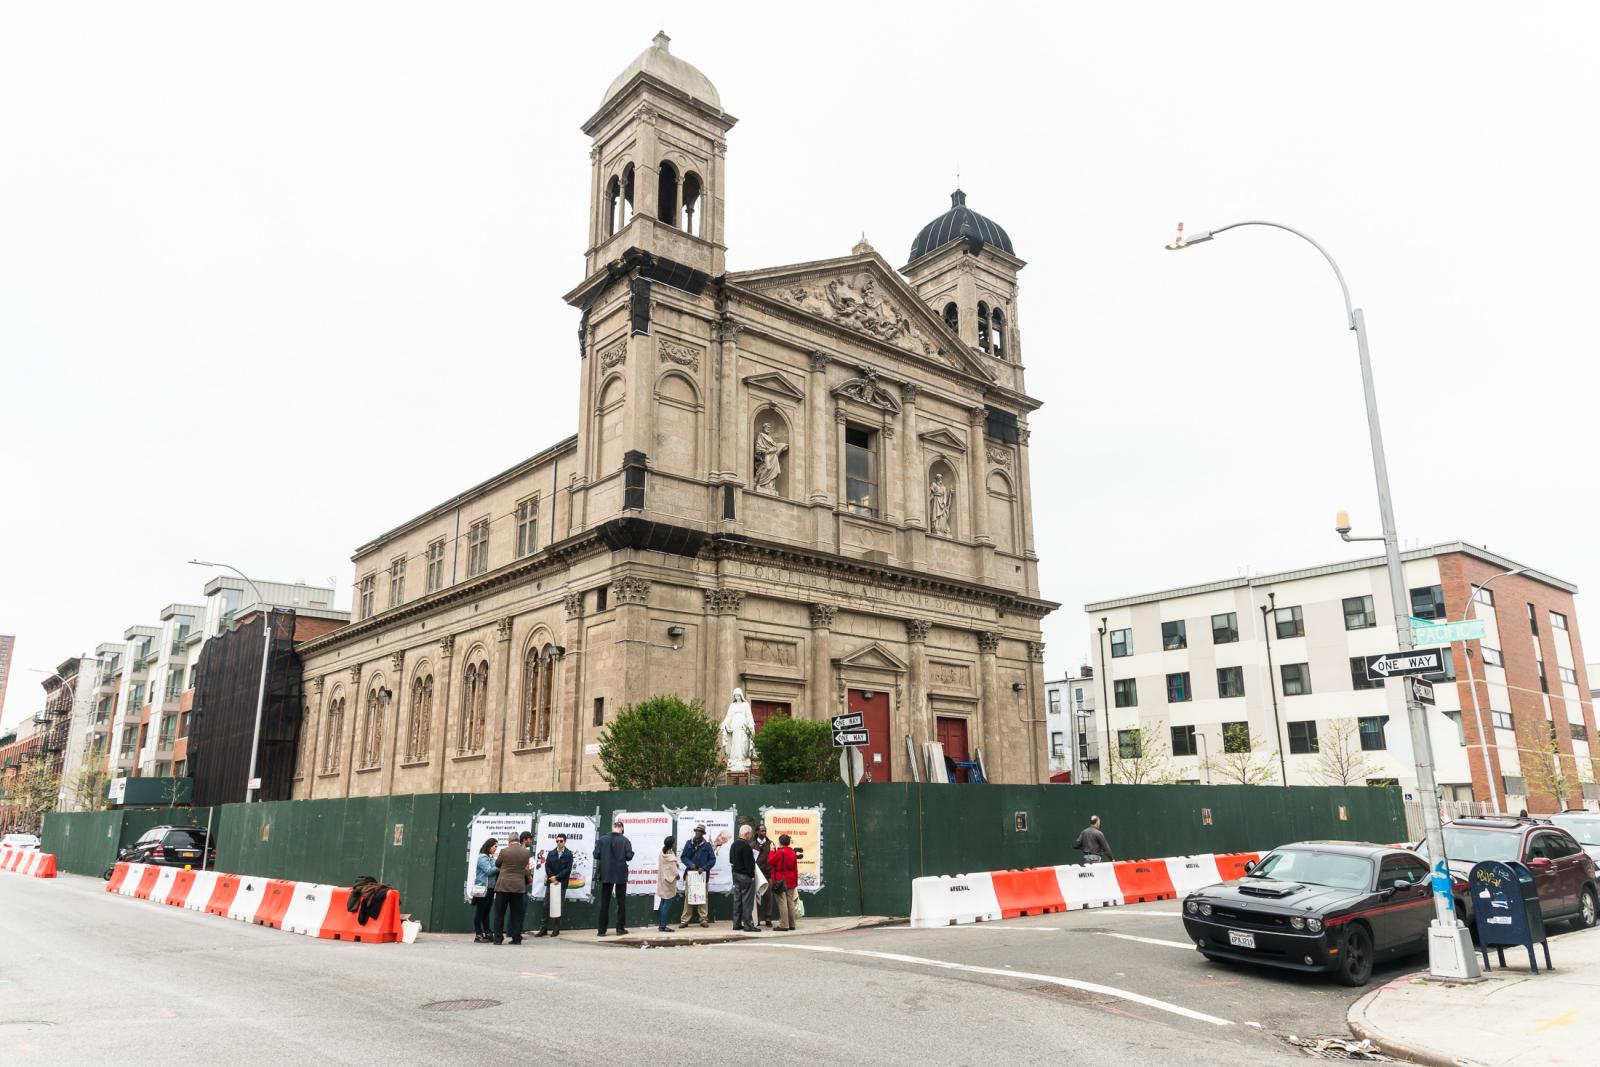 Our Lady of Loreto Church in Brownsville was demolished late 2017